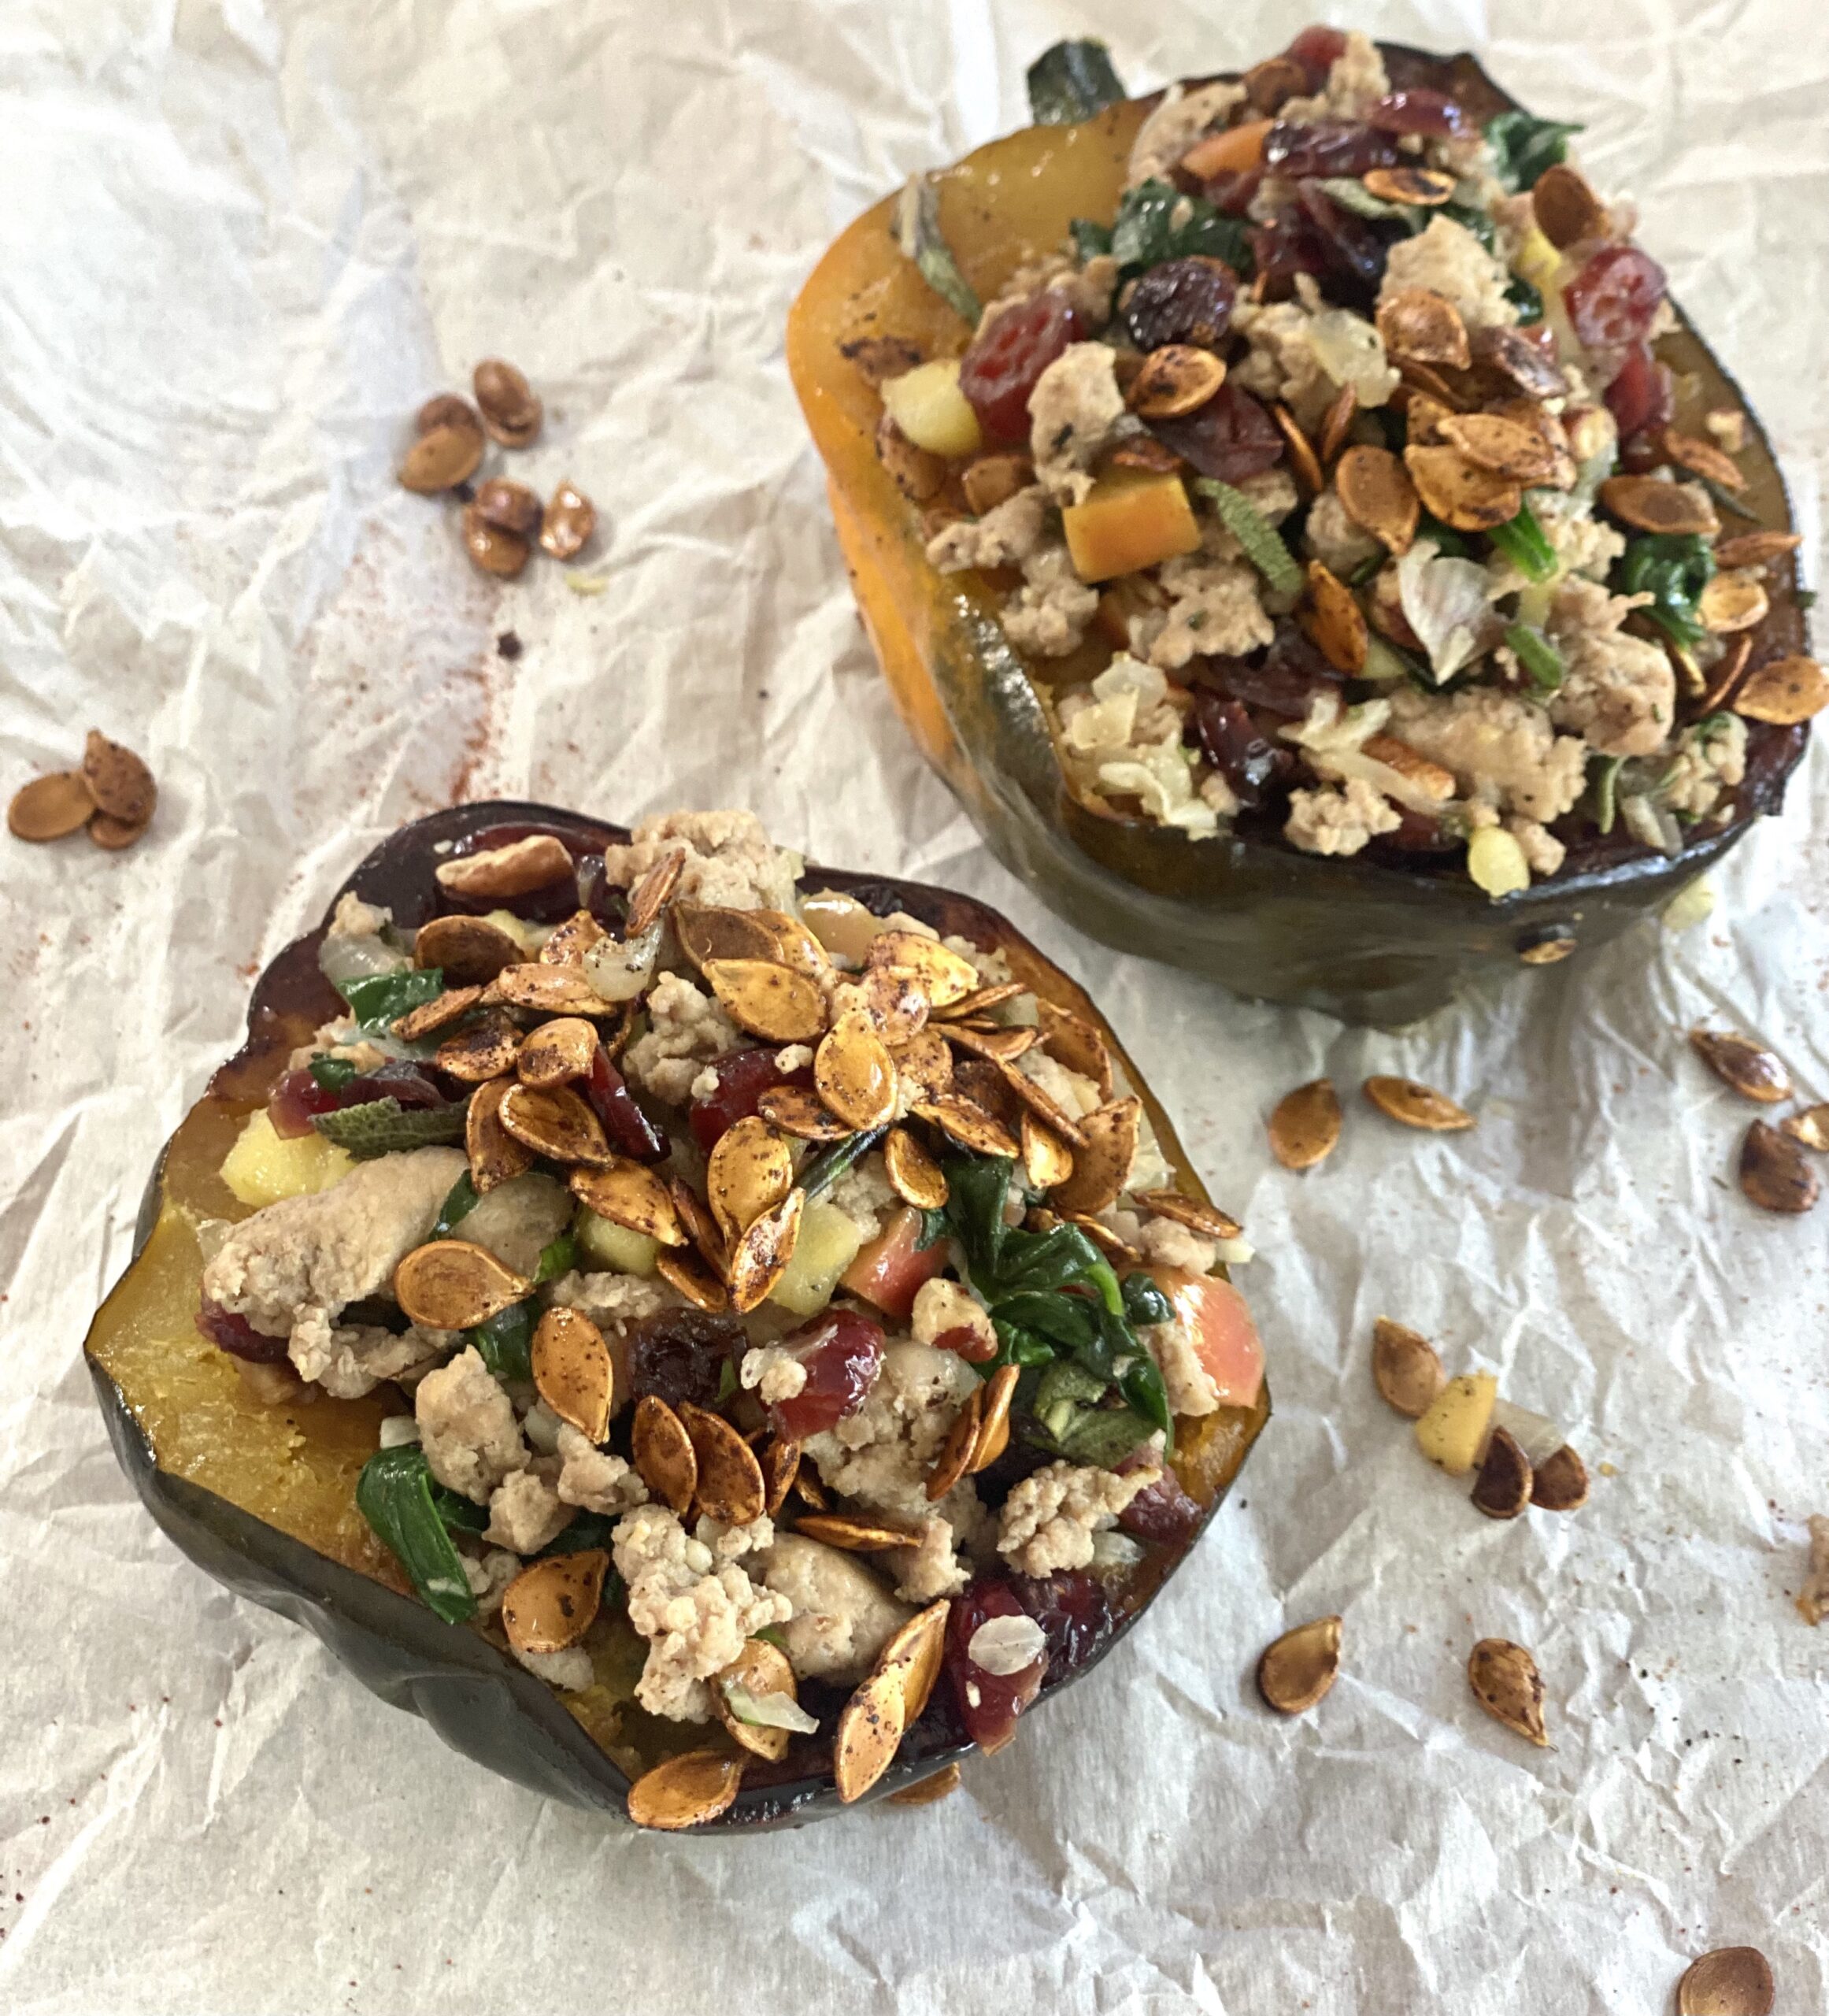 Two stuffed squash halves with nuts and other ingredients.